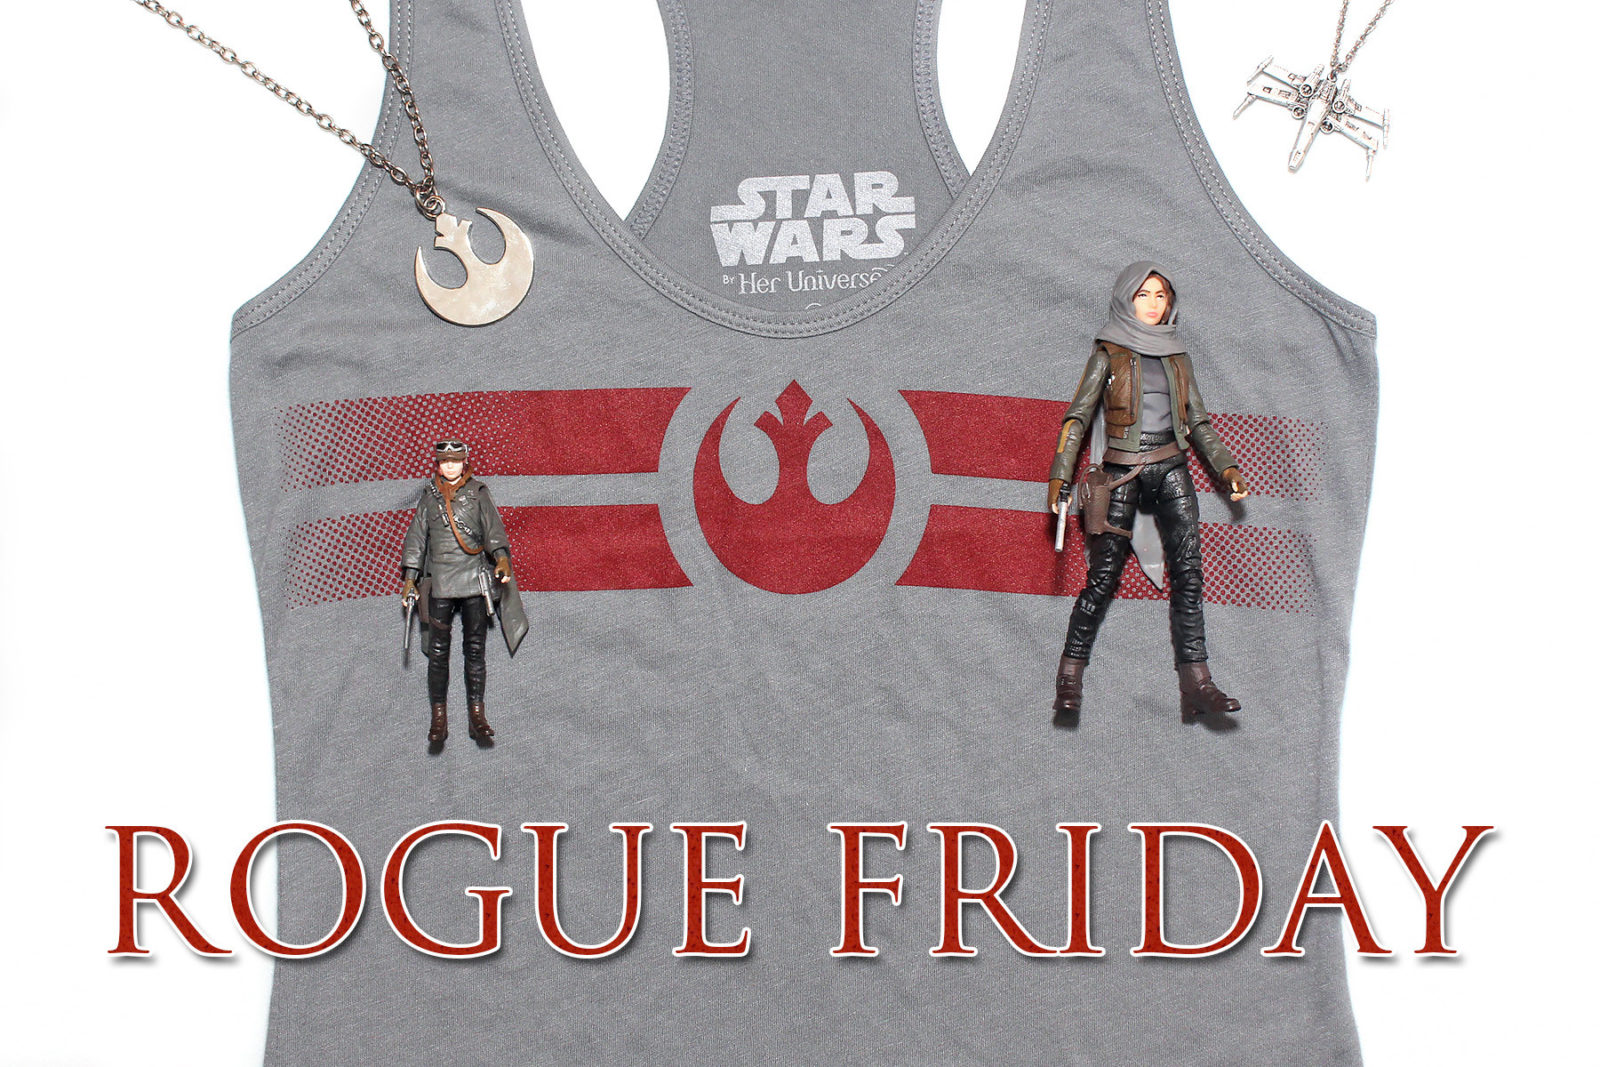 Rogue Friday is here!